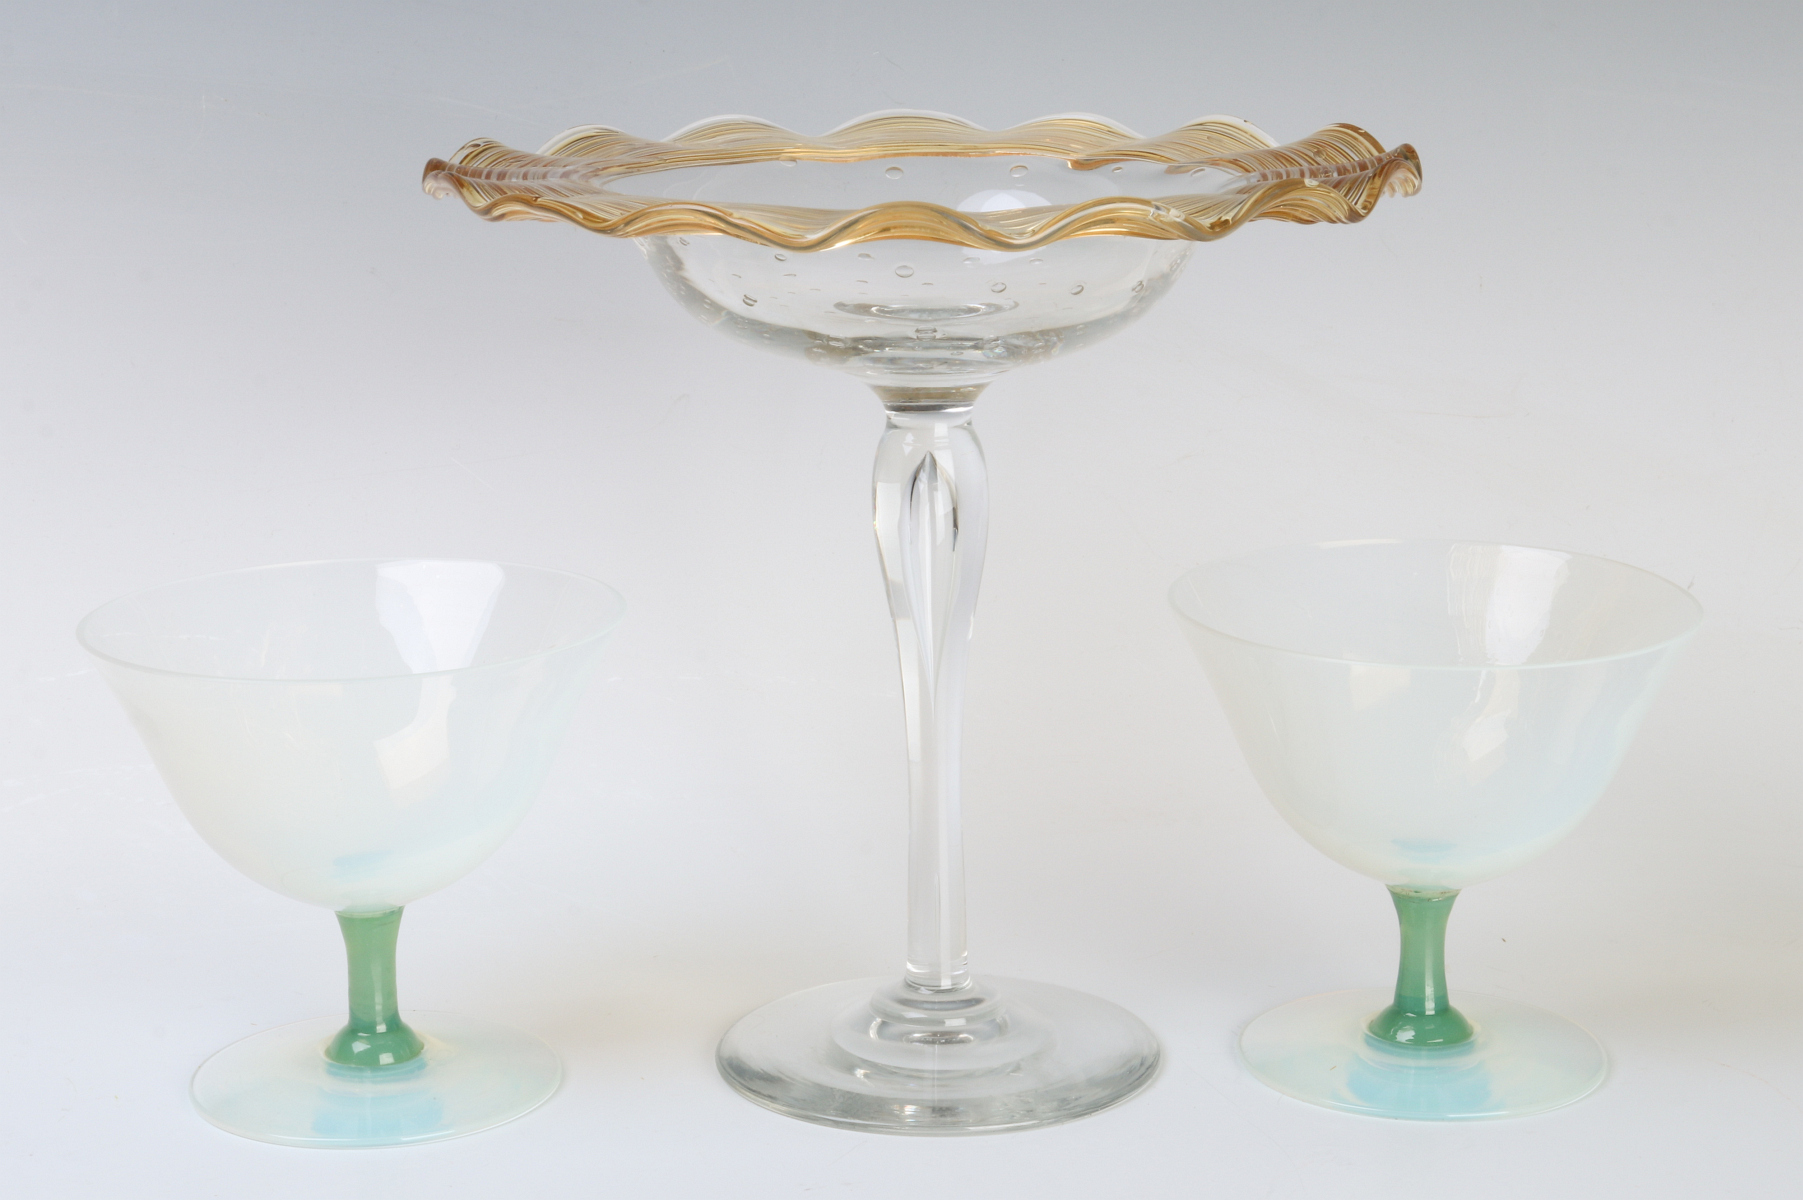 H.C. FRY GLASS CO. COMPOTE AND SHERBET PAIR